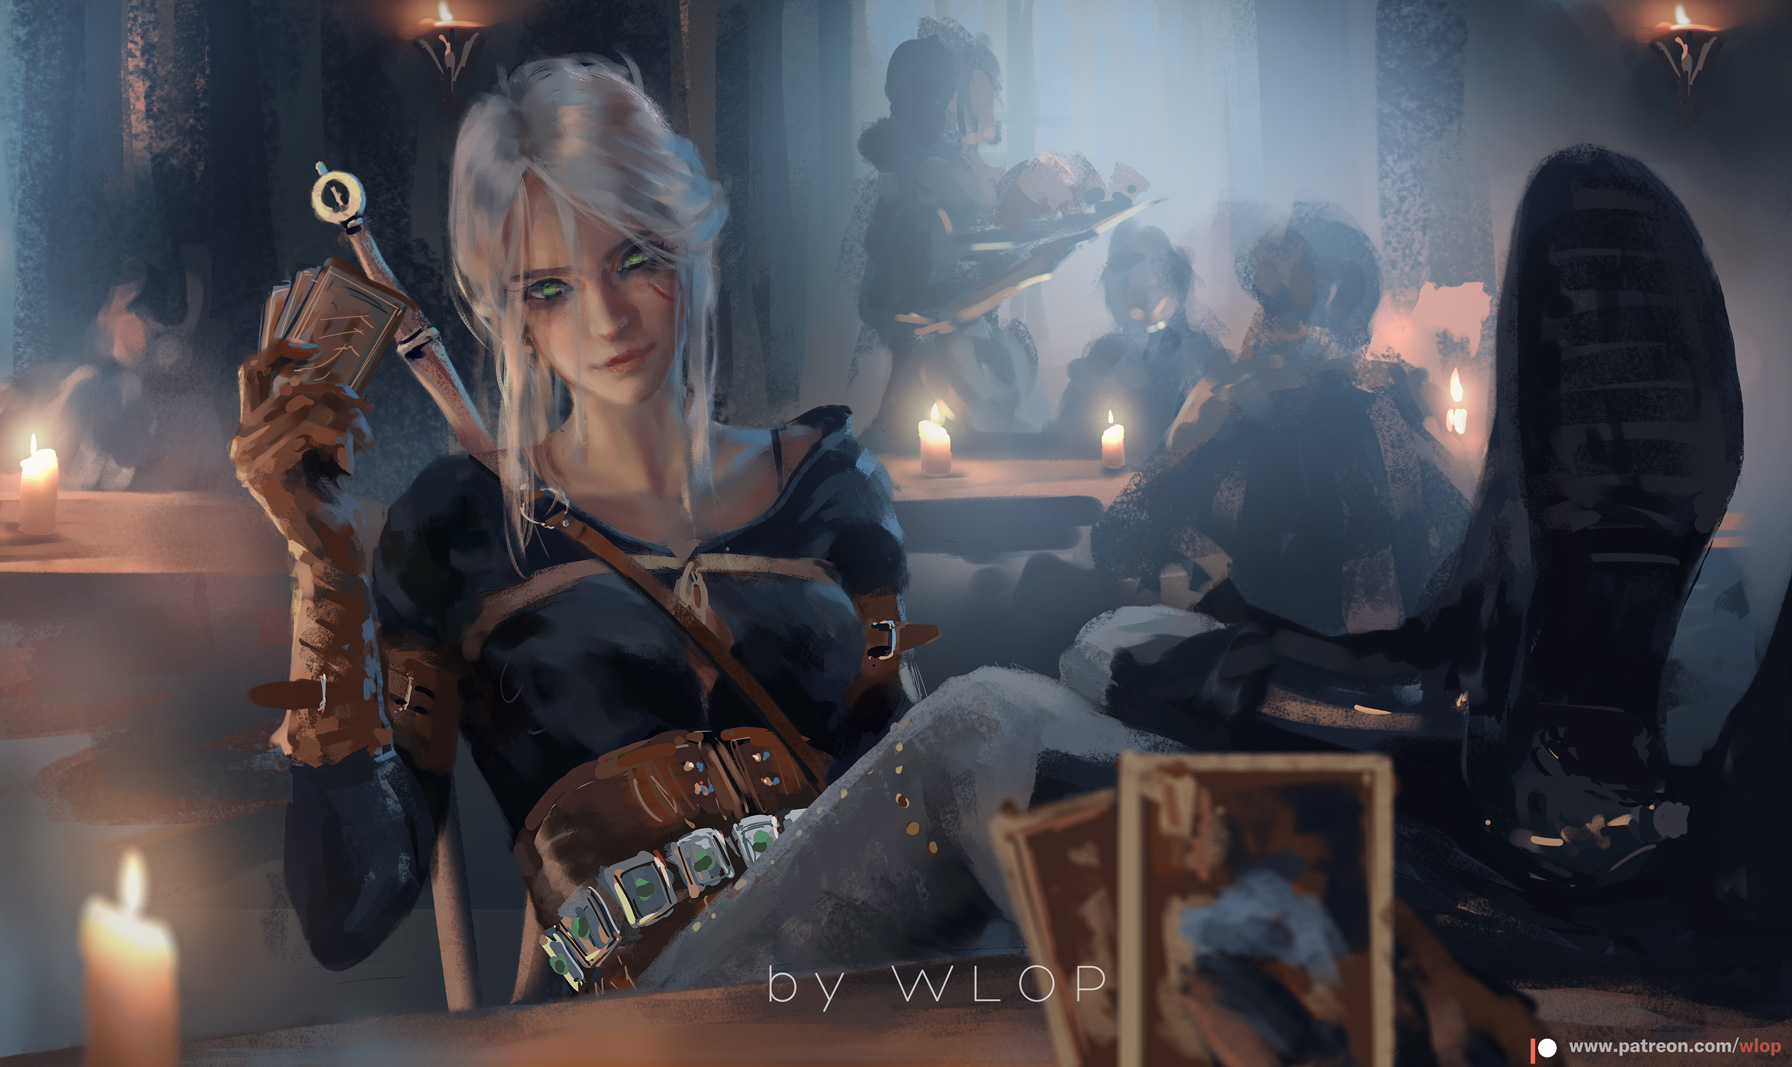 The Witcher 3: Wild Hunt Art by Wang Ling